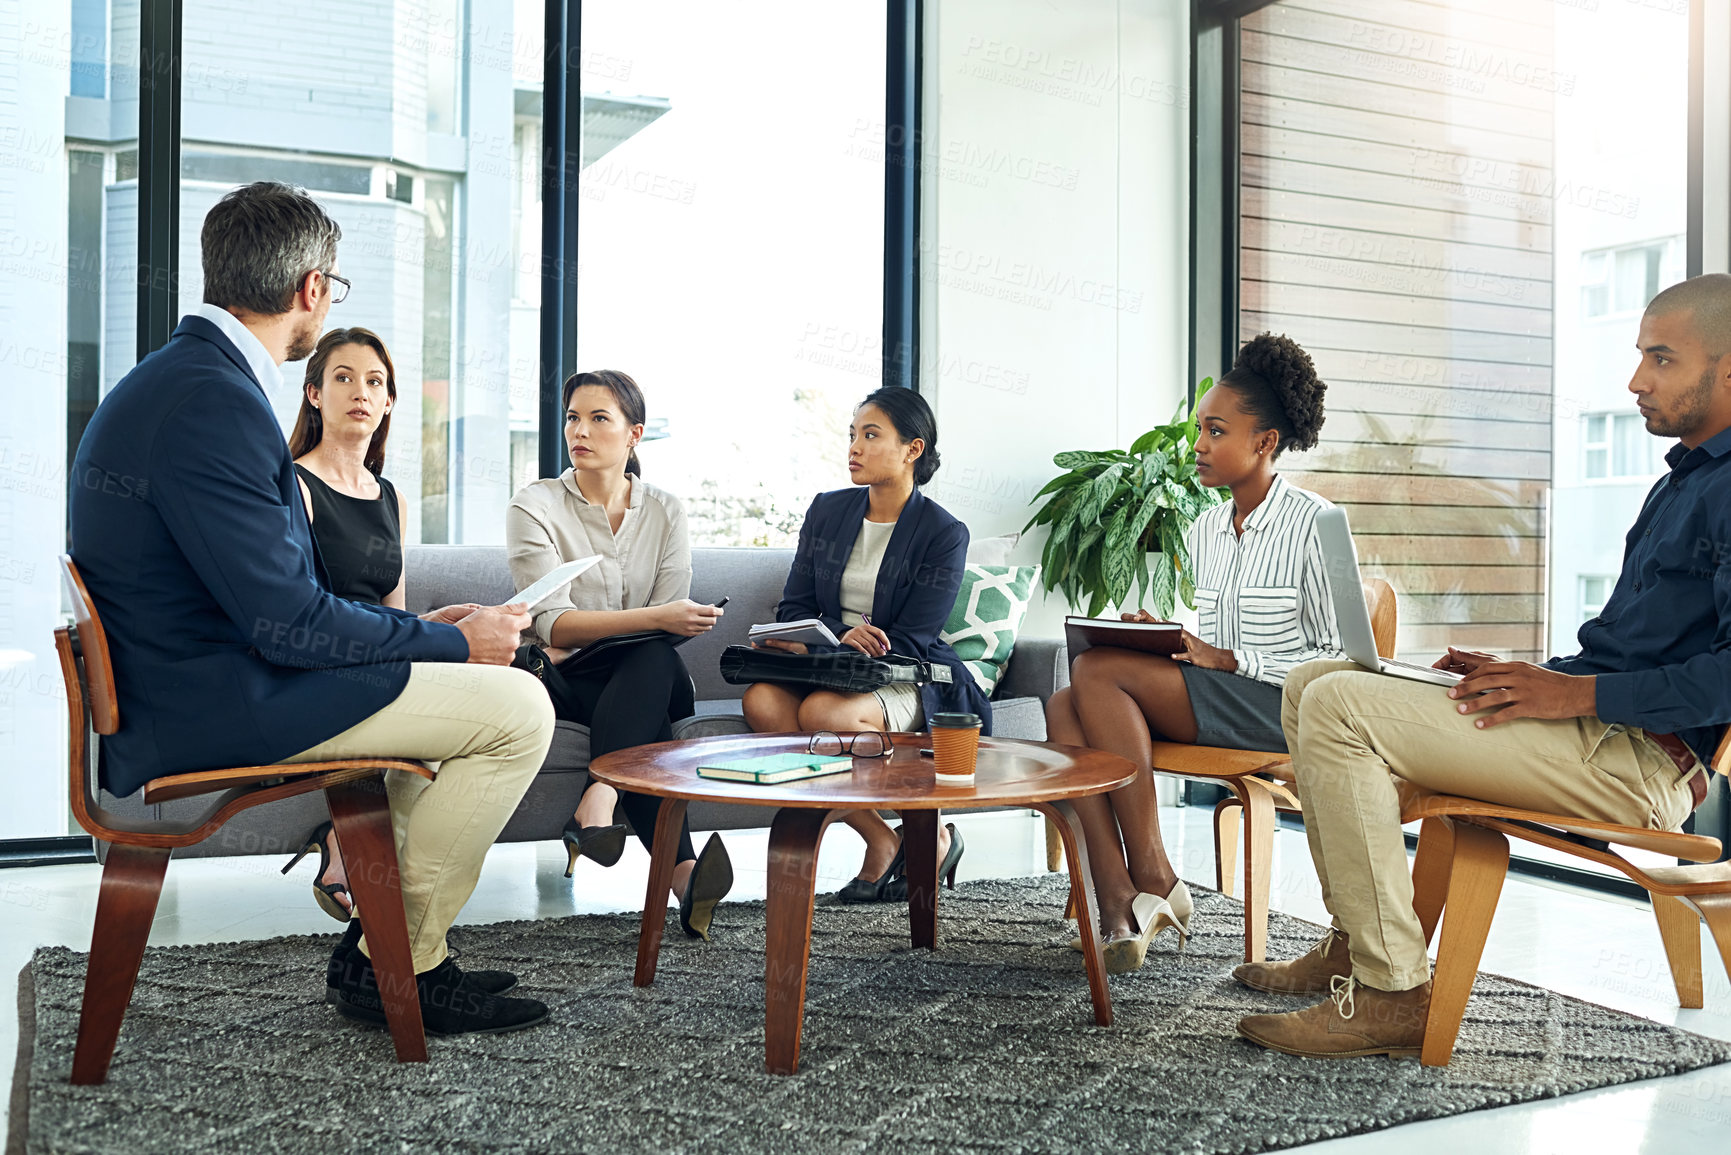 Buy stock photo Shot of a group of work colleagues talking together in a meeting in an office